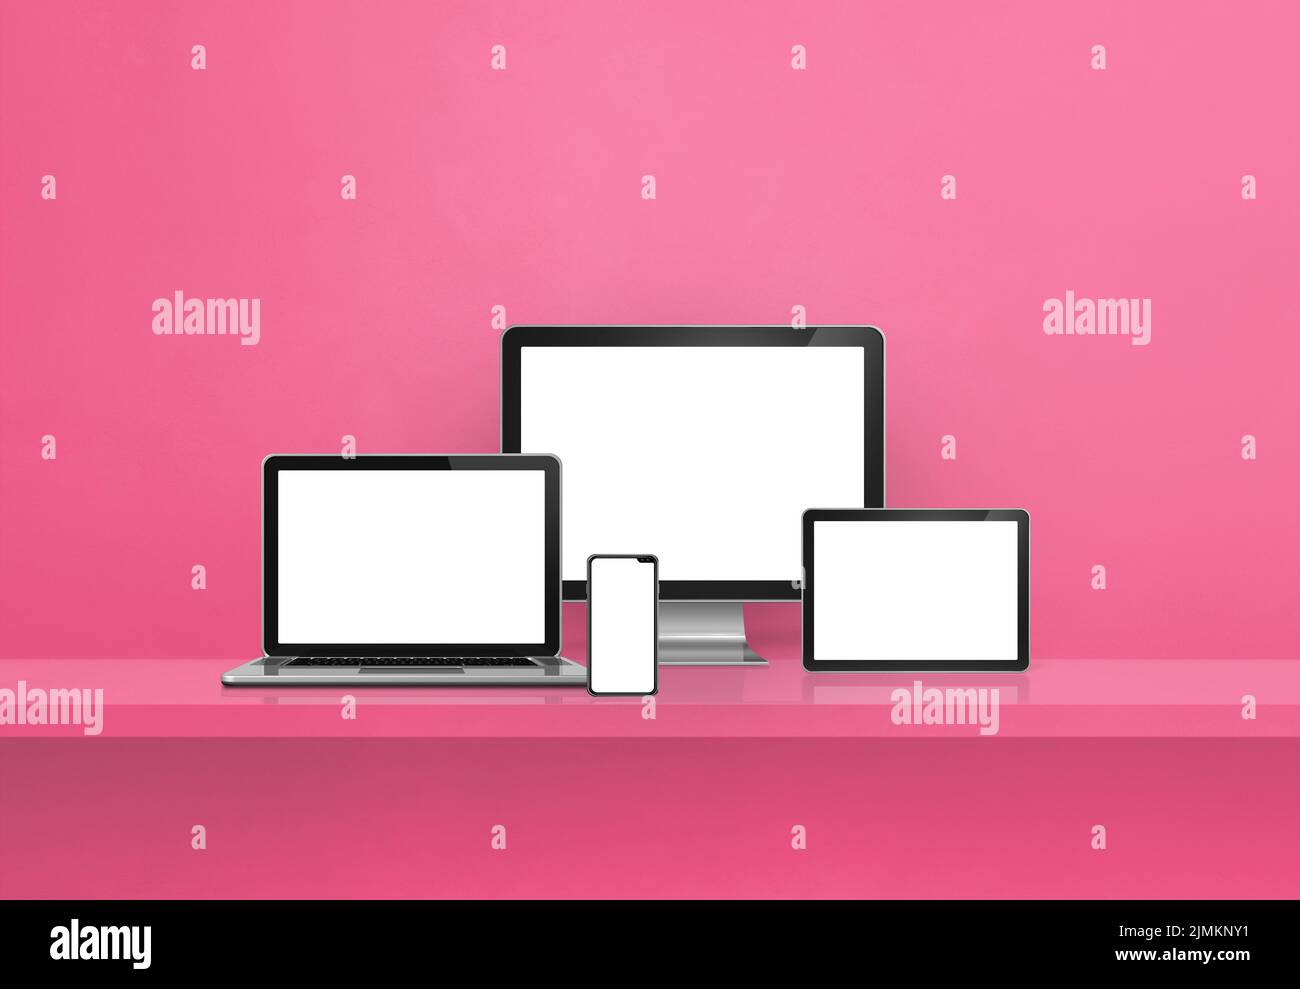 Computer, laptop, mobile phone and digital tablet pc. Pink shelf banner Stock Photo